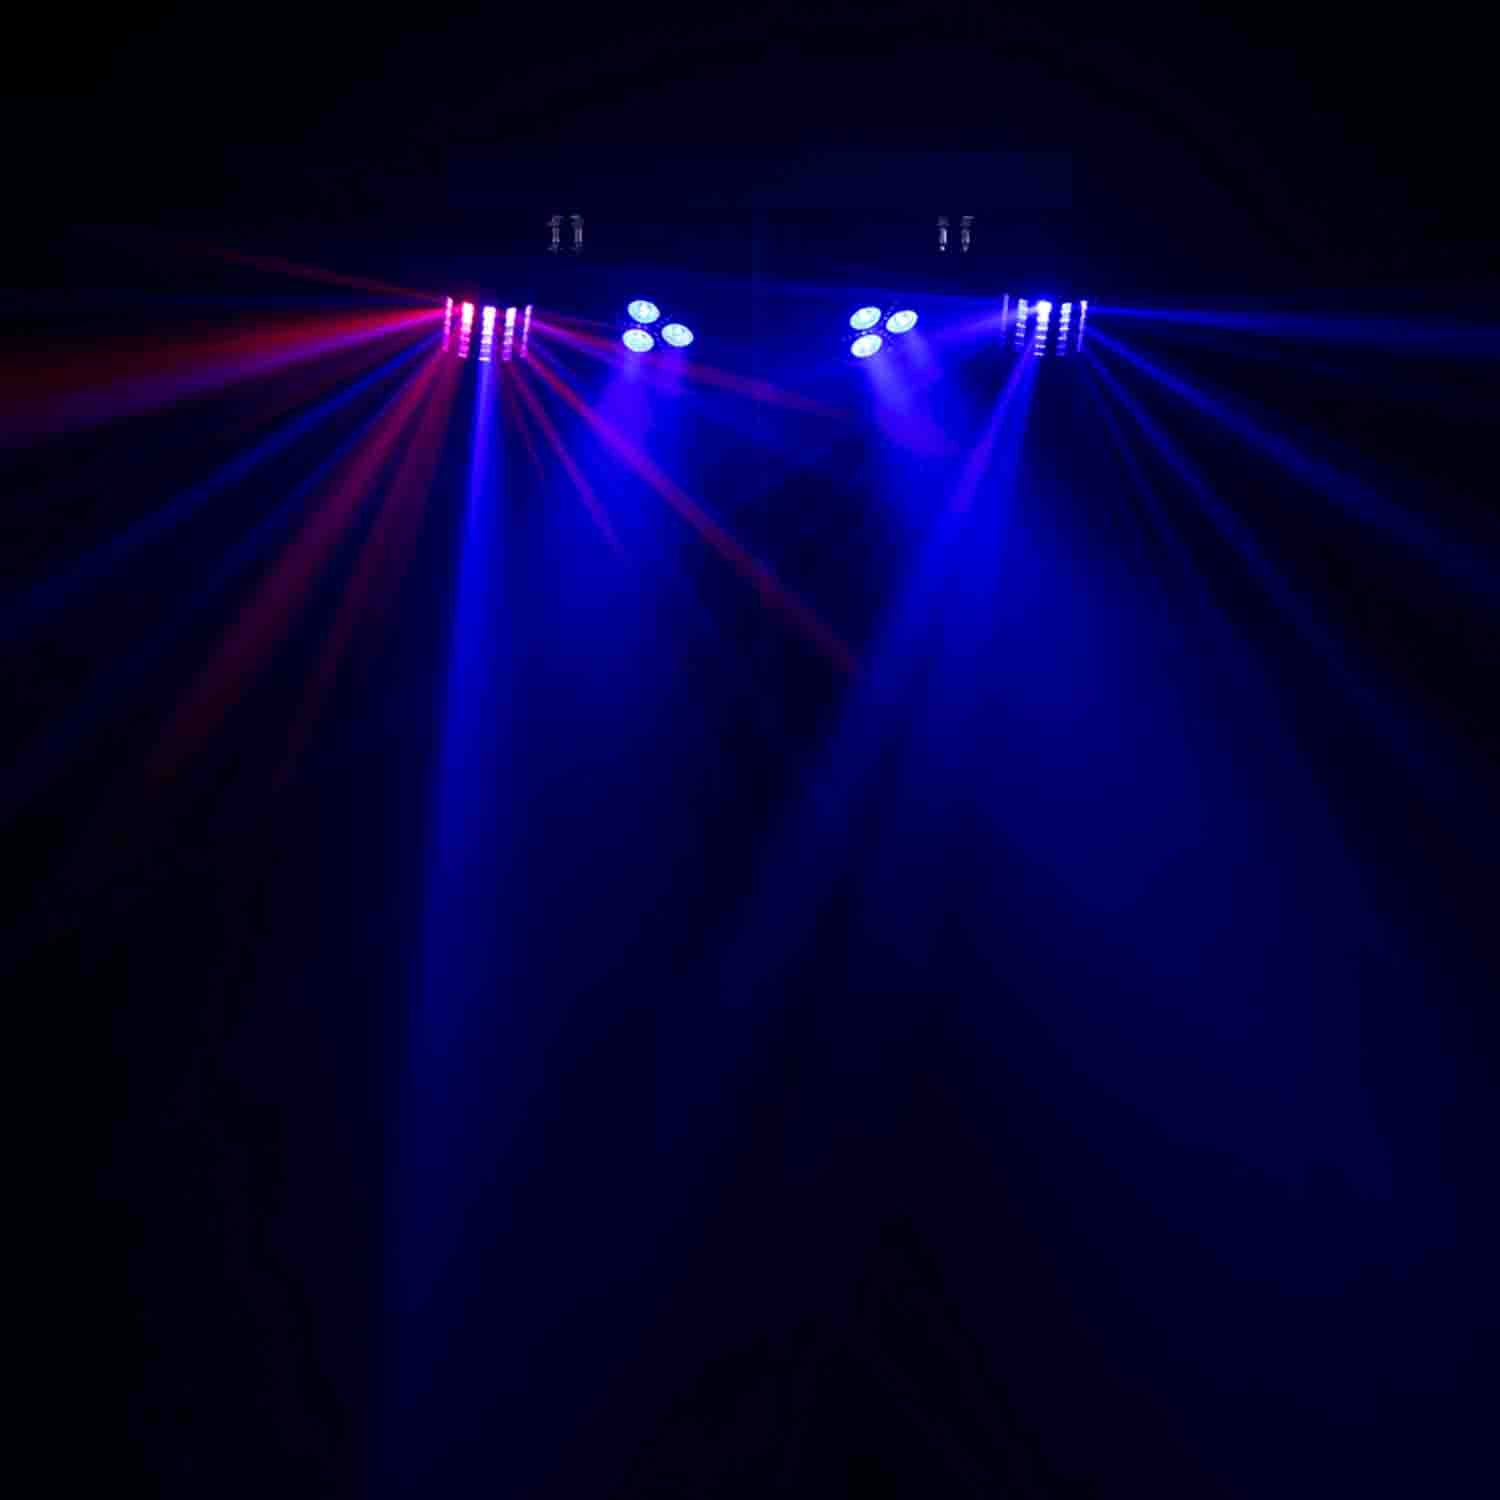 B-Stock: ColorKey CKU-3020 PartyBar GO Battery Powered Lighting Package - Hollywood DJ